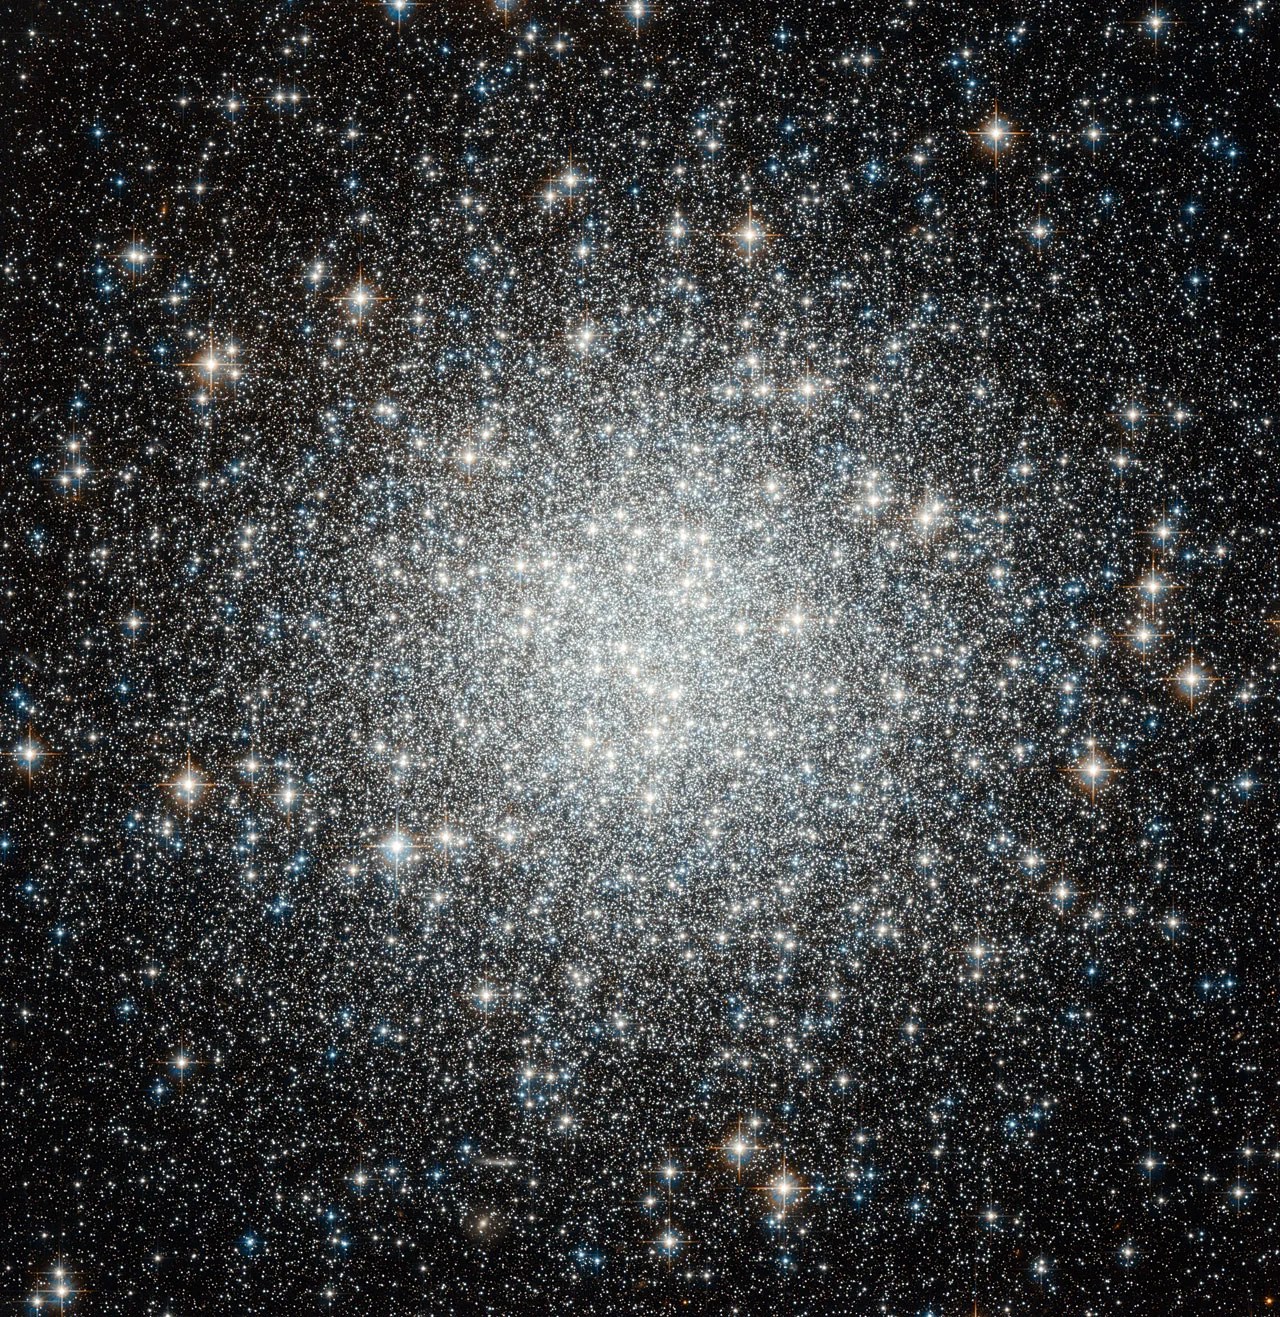 Large galaxy that's globular in shape, the closer to the center you get the brighter and whiter the image due to the amount of stars. Stars are everywhere in this image, of all sorts of colors.